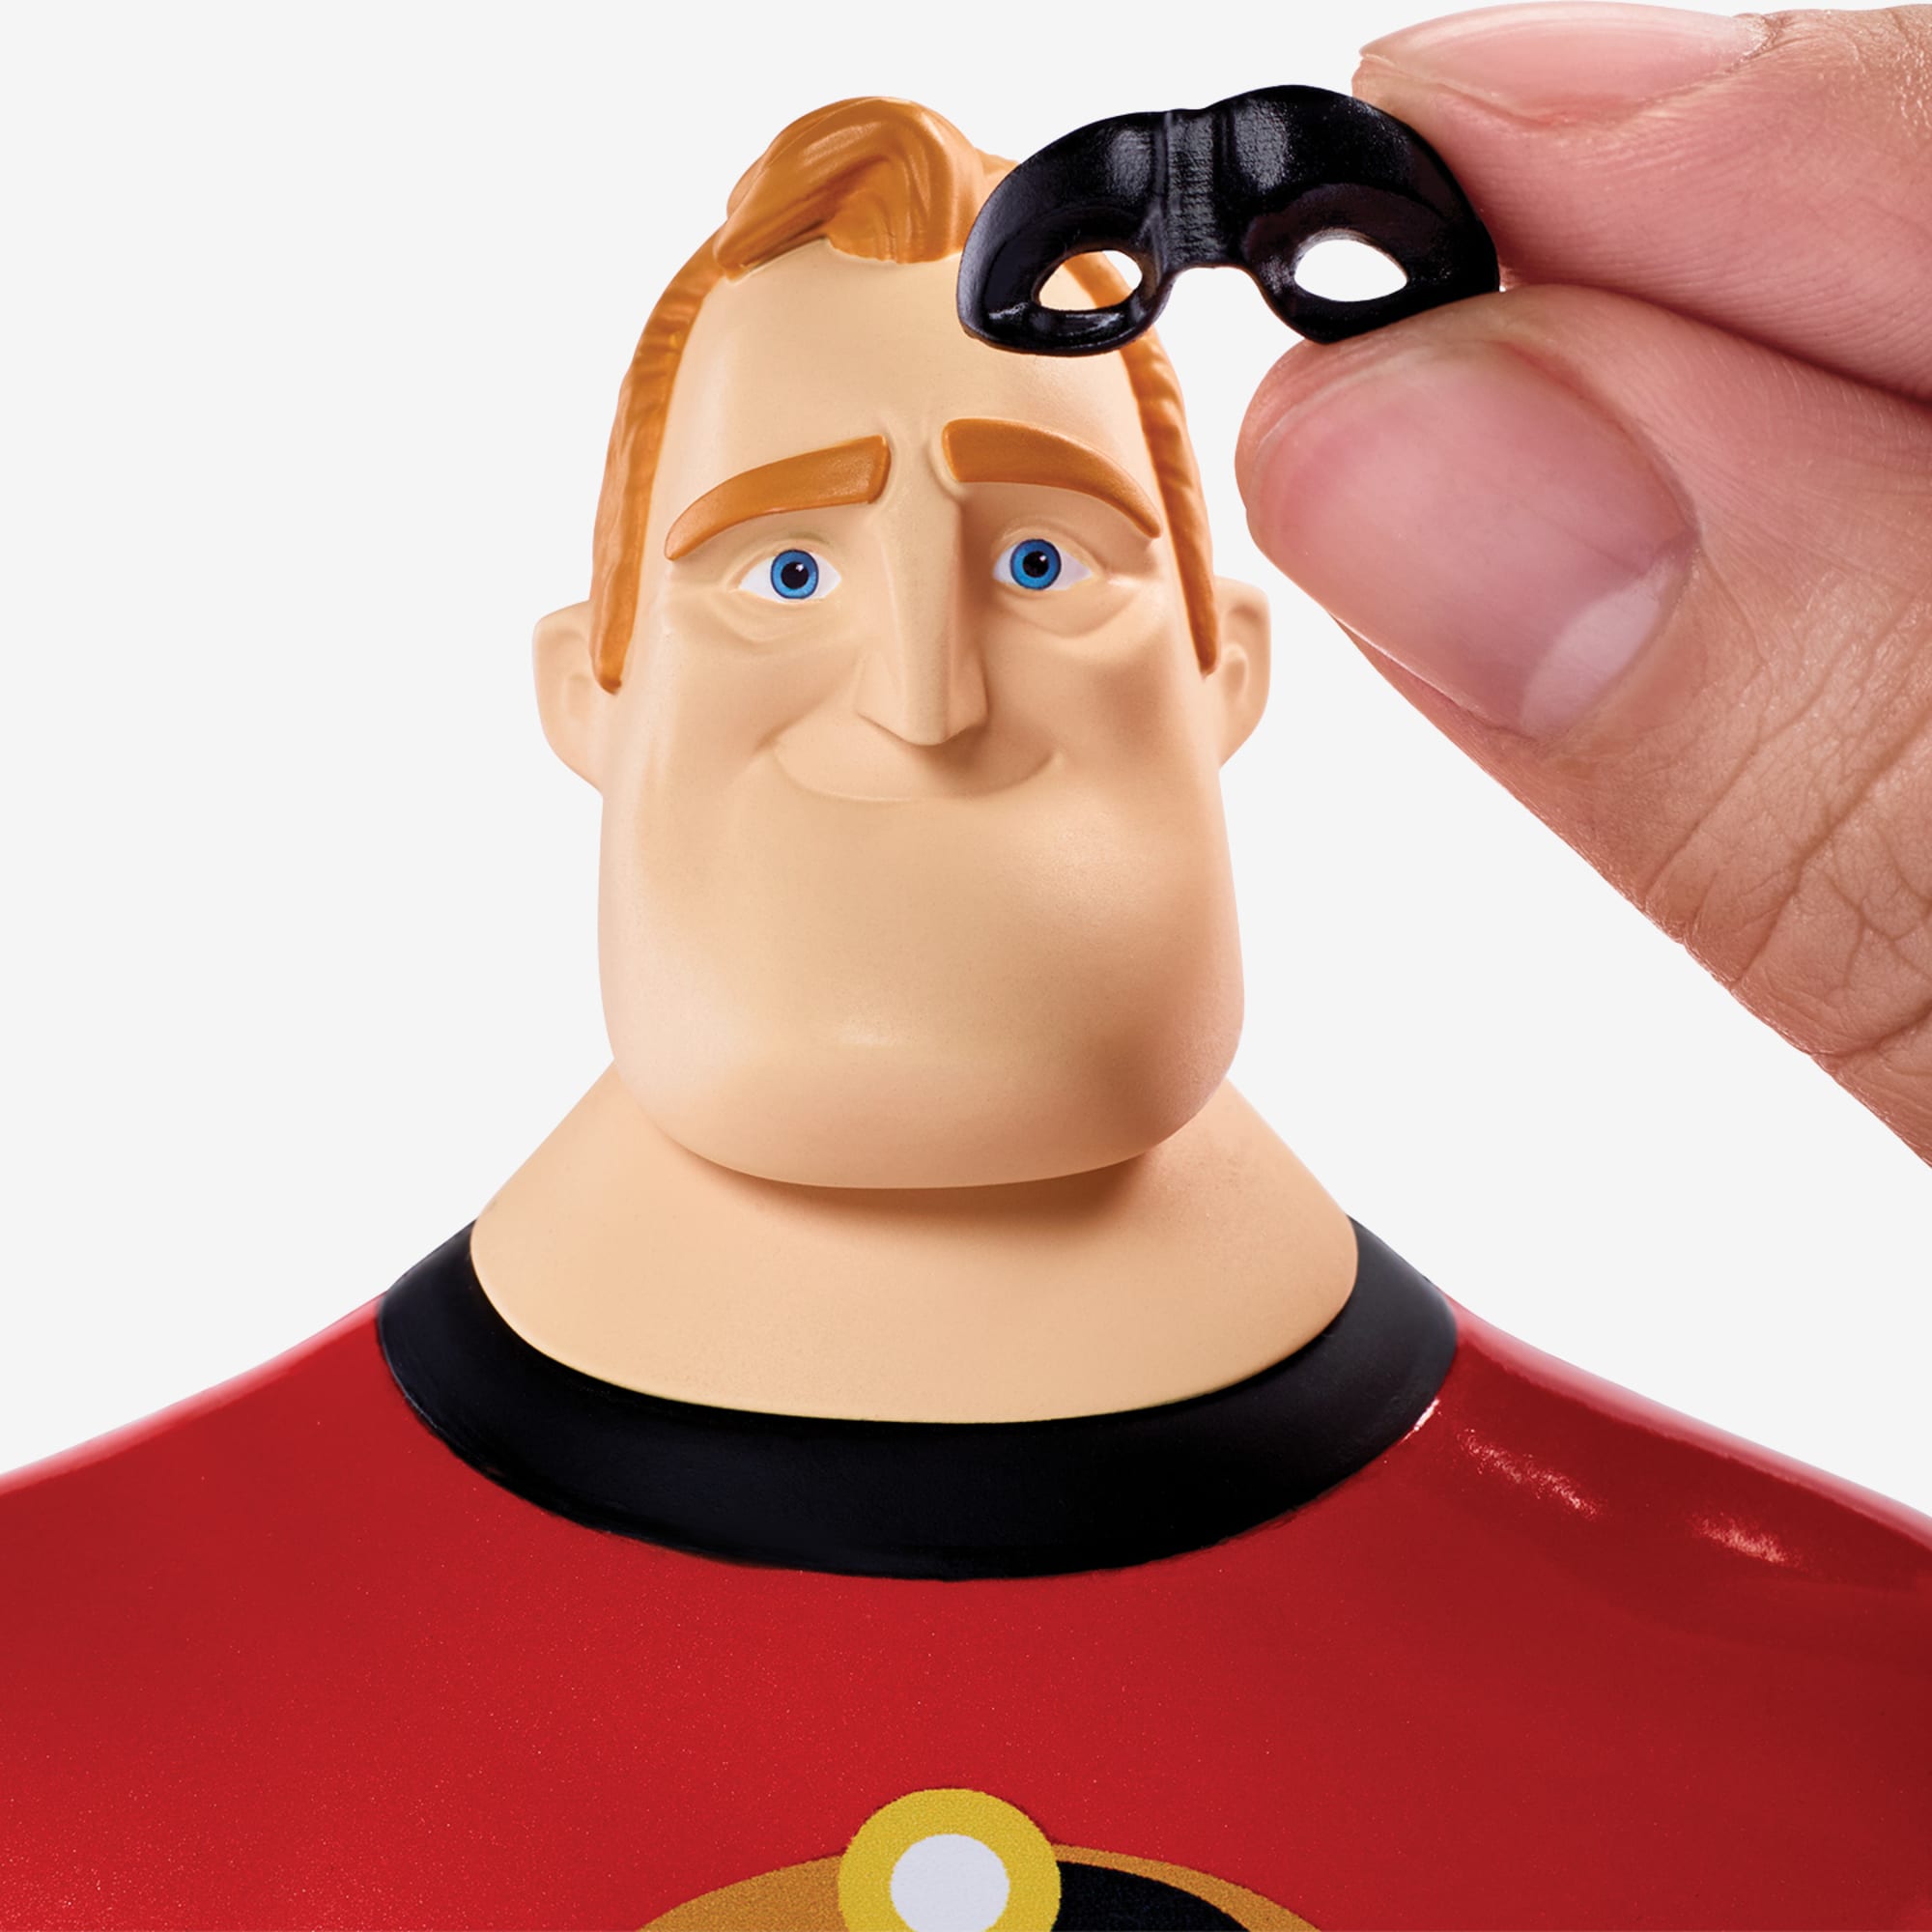 2018's 'Incredibles' sequel will face a different superhero movie world -  CSMonitor.com